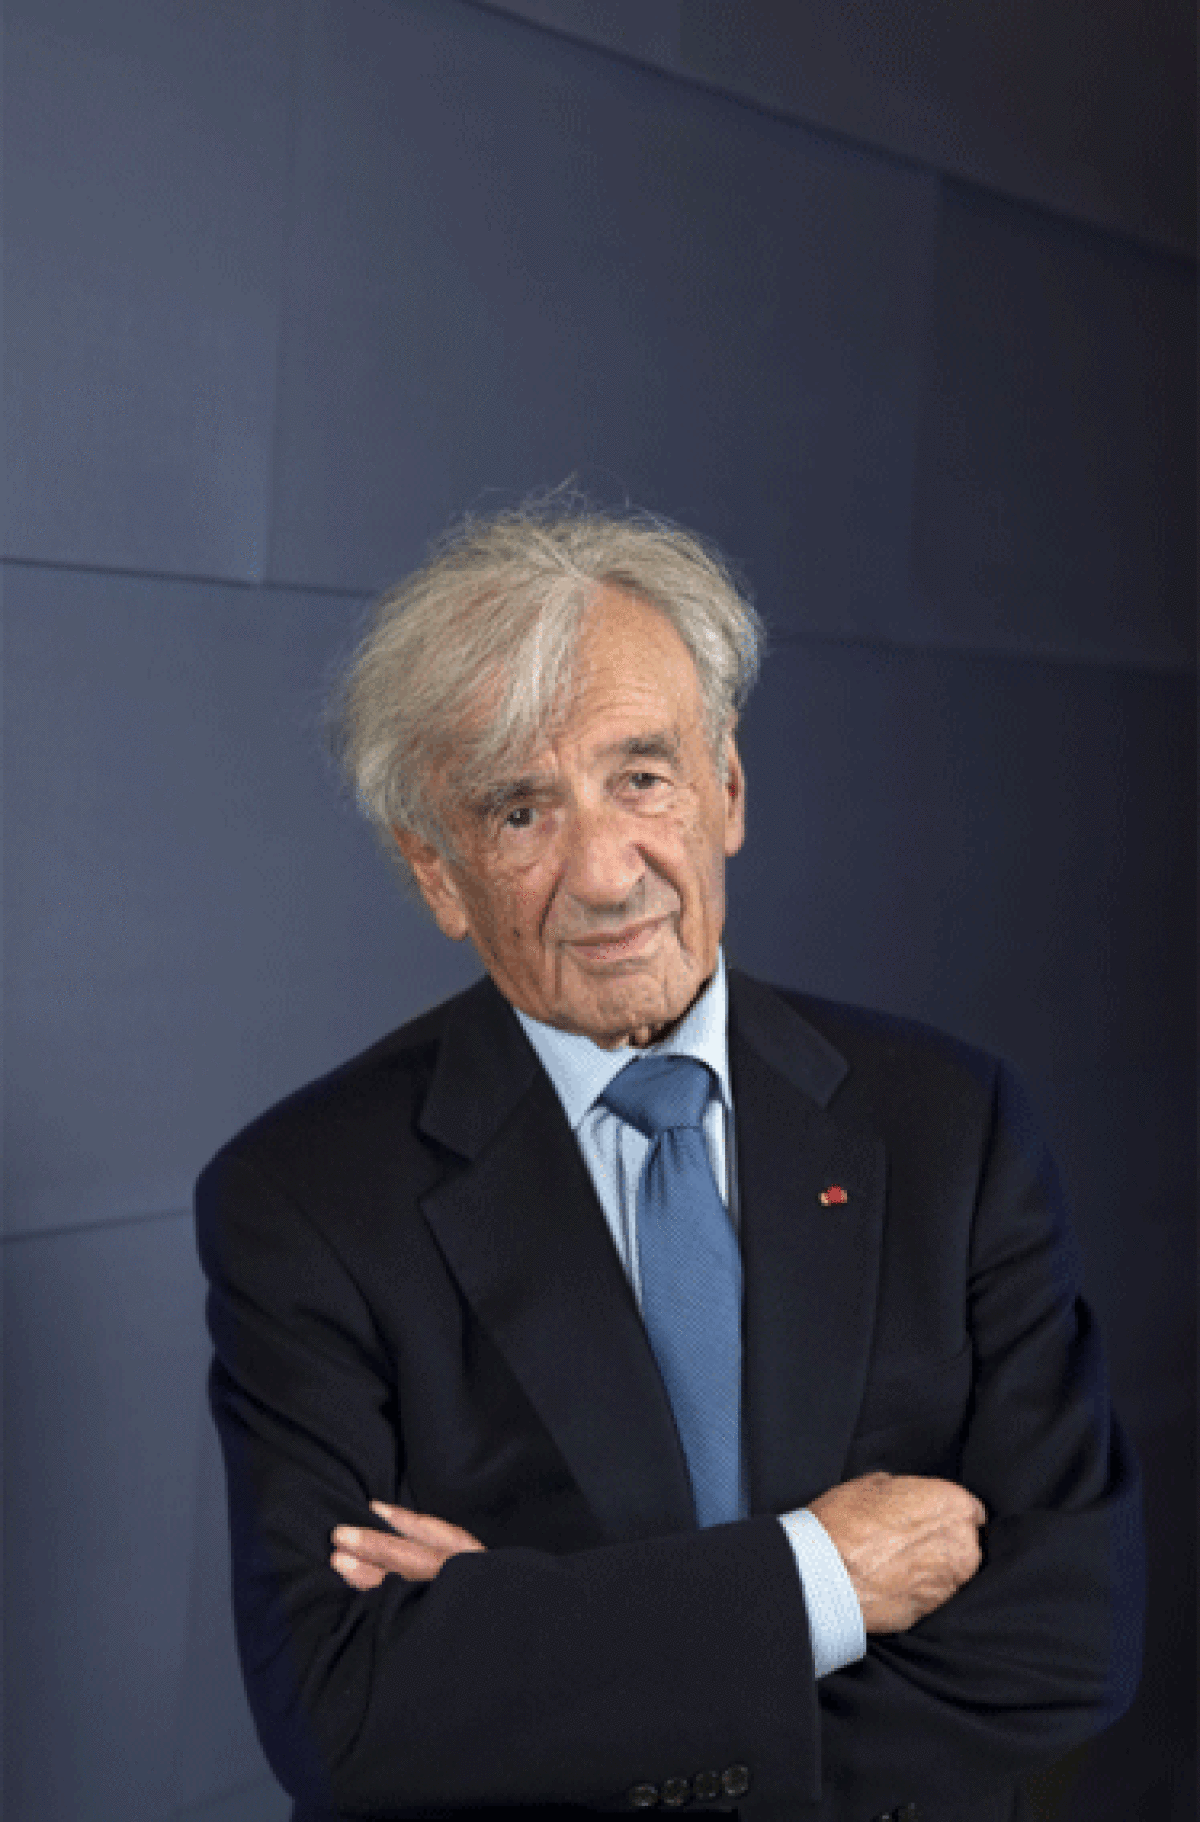 Elie Wiesel, a Distinguished Presidential Fellow at Chapman University, is photographed at the Holocaust Memorial Library at Chapman University in Orange. Romanian-born Wiesel is a Jewish-American bestselling author, professor, winner of the Nobel Peace Prize, political activist, human rights advocate and Holocaust survivor.